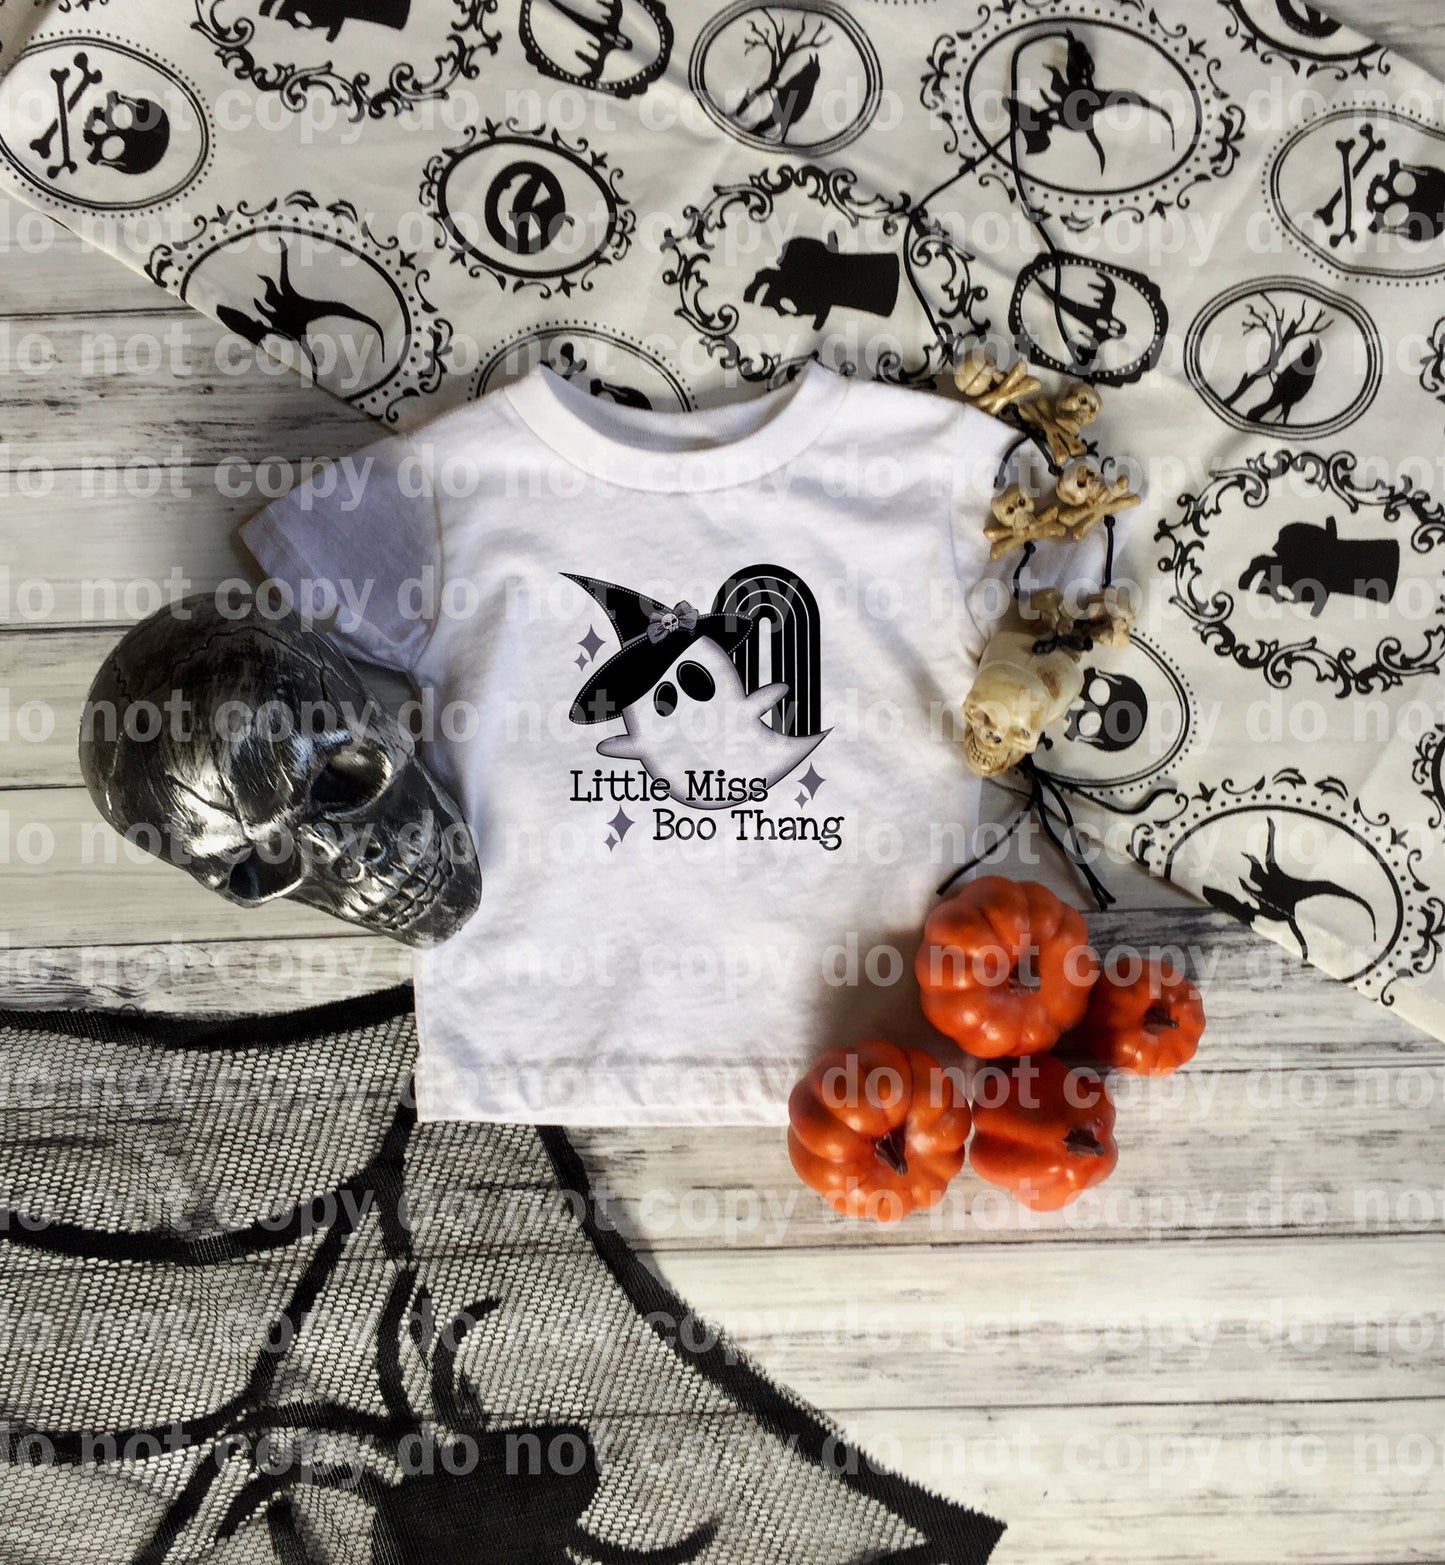 Little Miss Boo Thang Dream Print or Sublimation Print